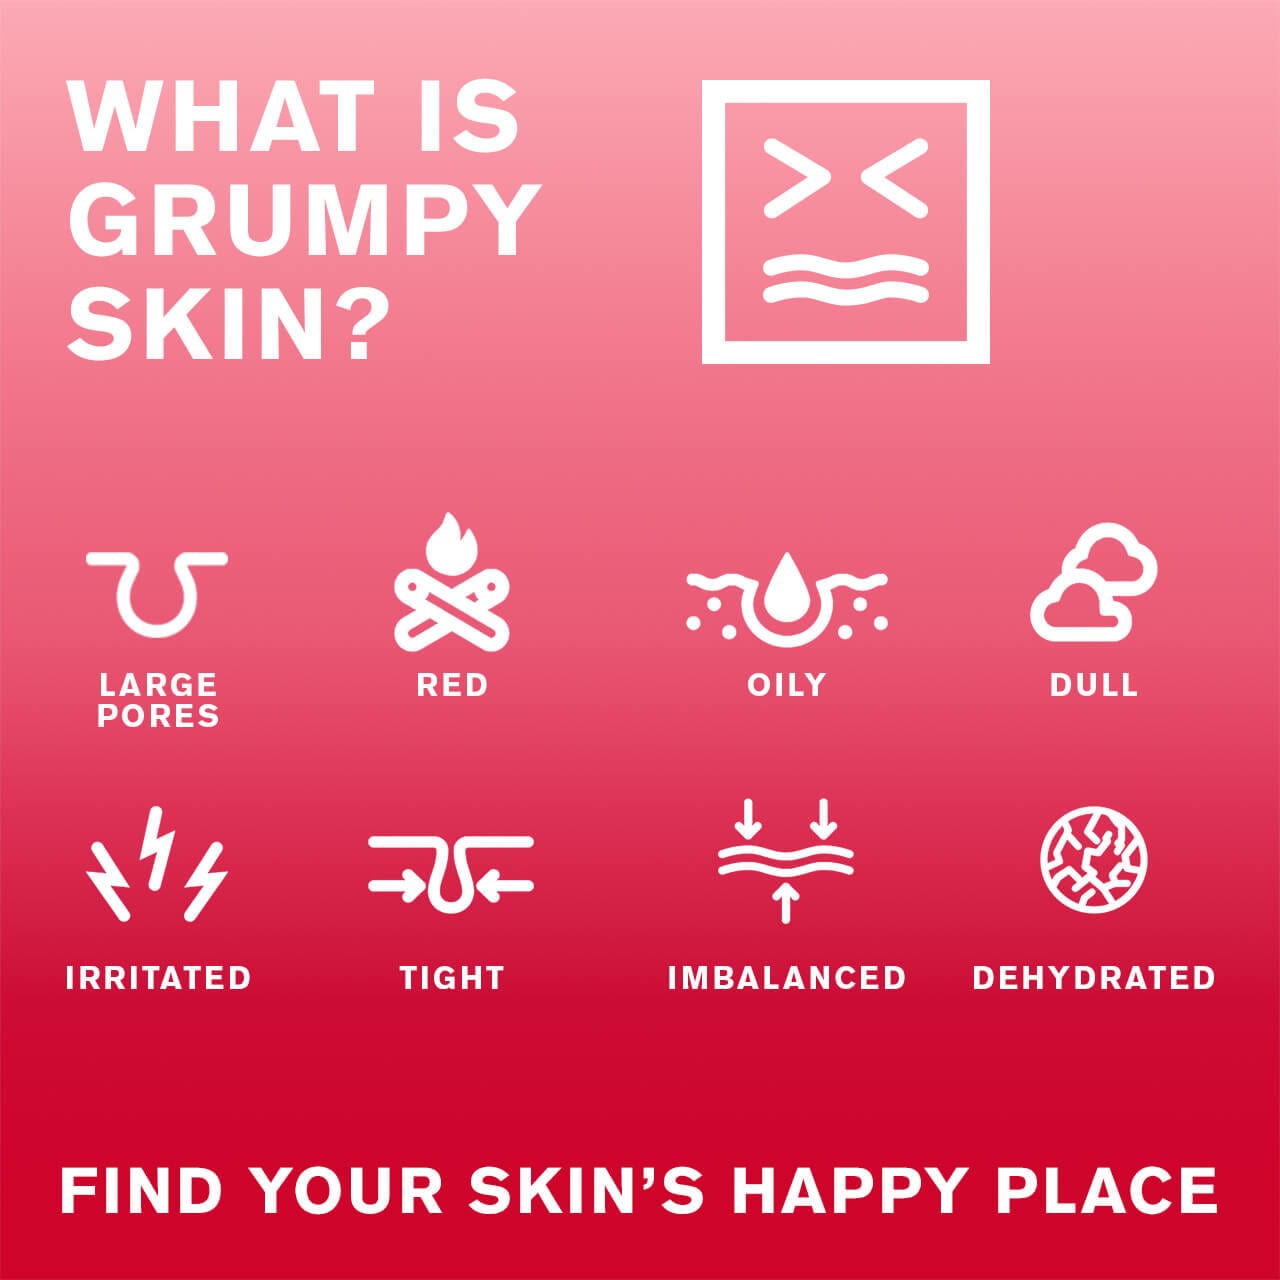 What is grumpy skin? Large Pores Red Oily Dull Irritated Tight Imbalanced Dehydrated. Find your skin's happy place